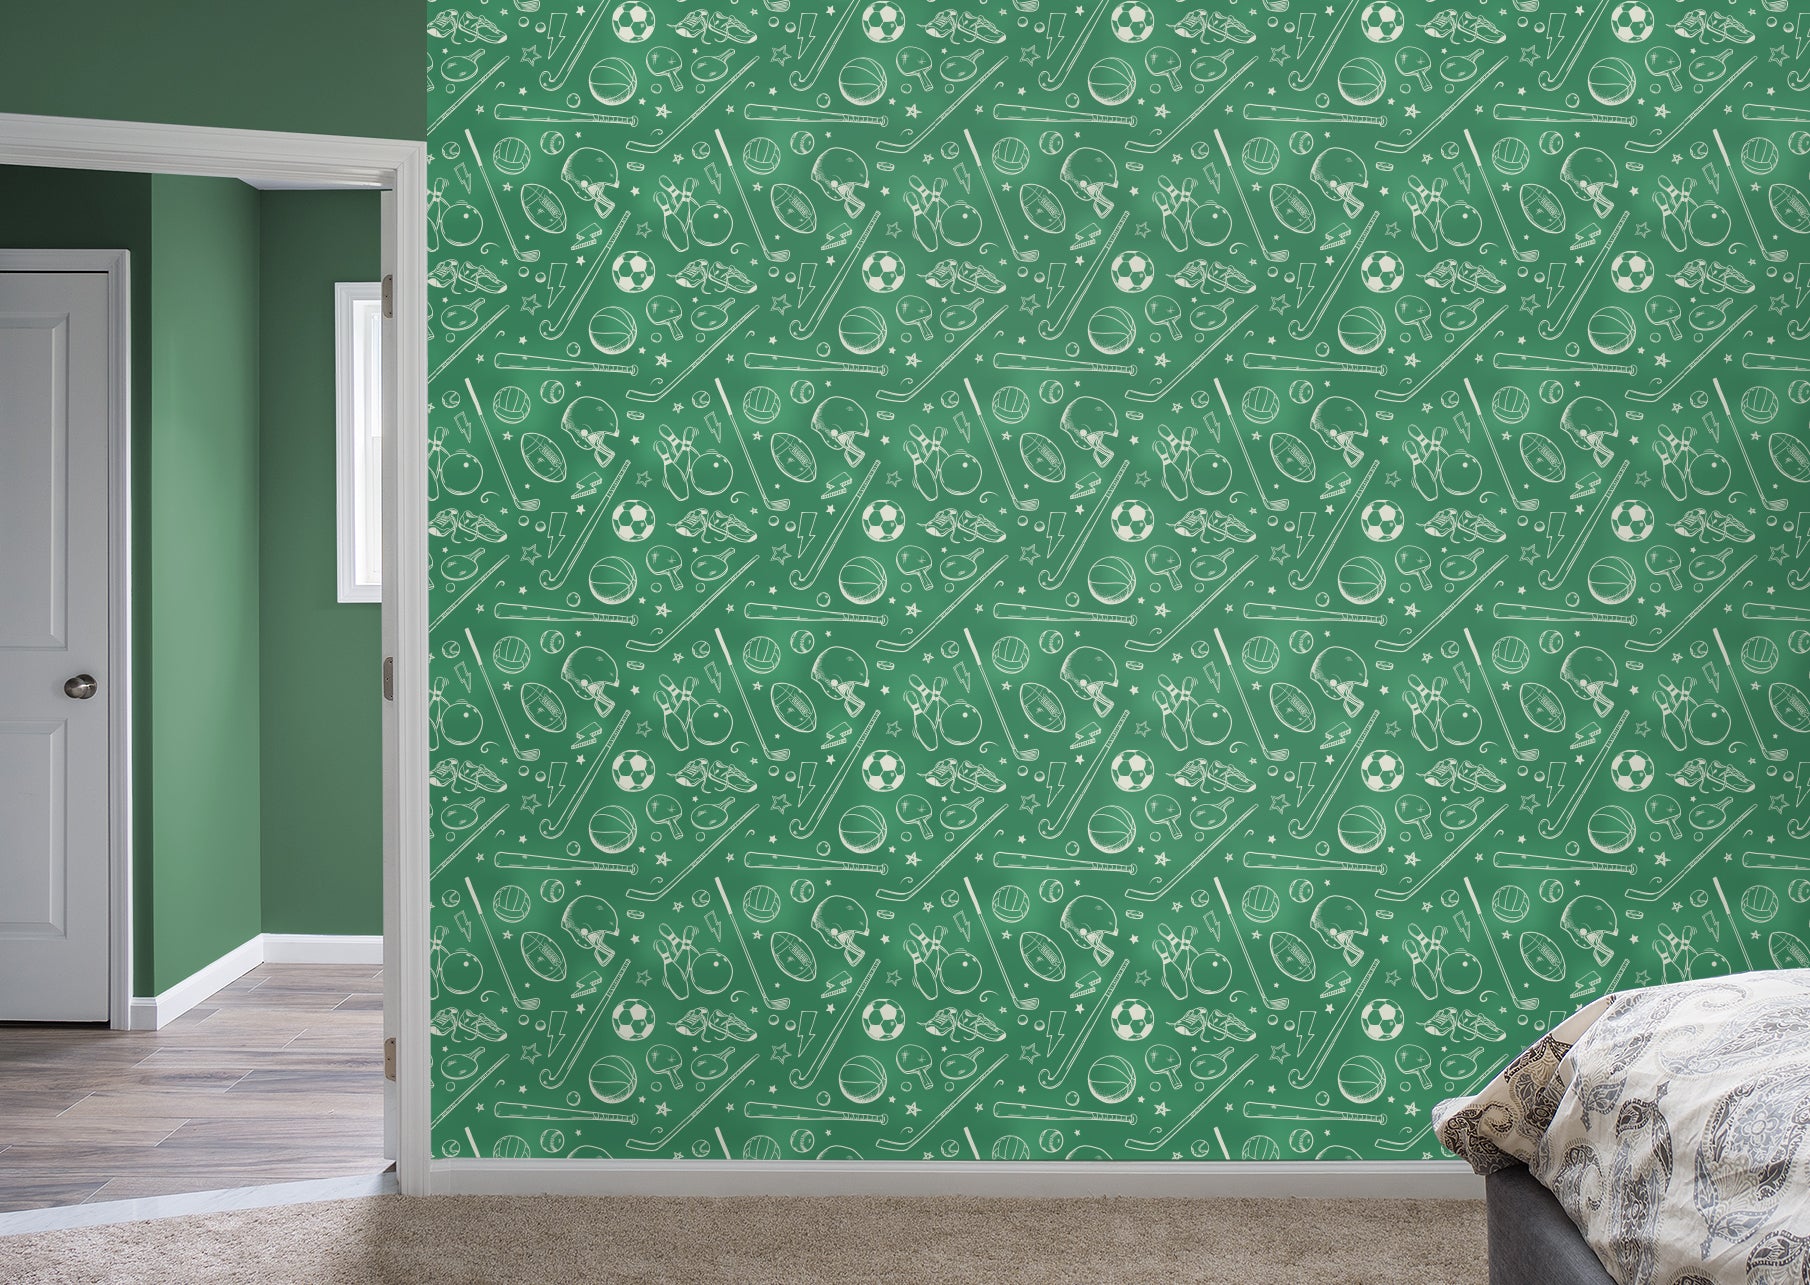 Master of Sports for Sports & Activities - Green for Sports & Activities - Peel & Stick Wallpaper 24" x 10.5 (21 sf) by Fathead